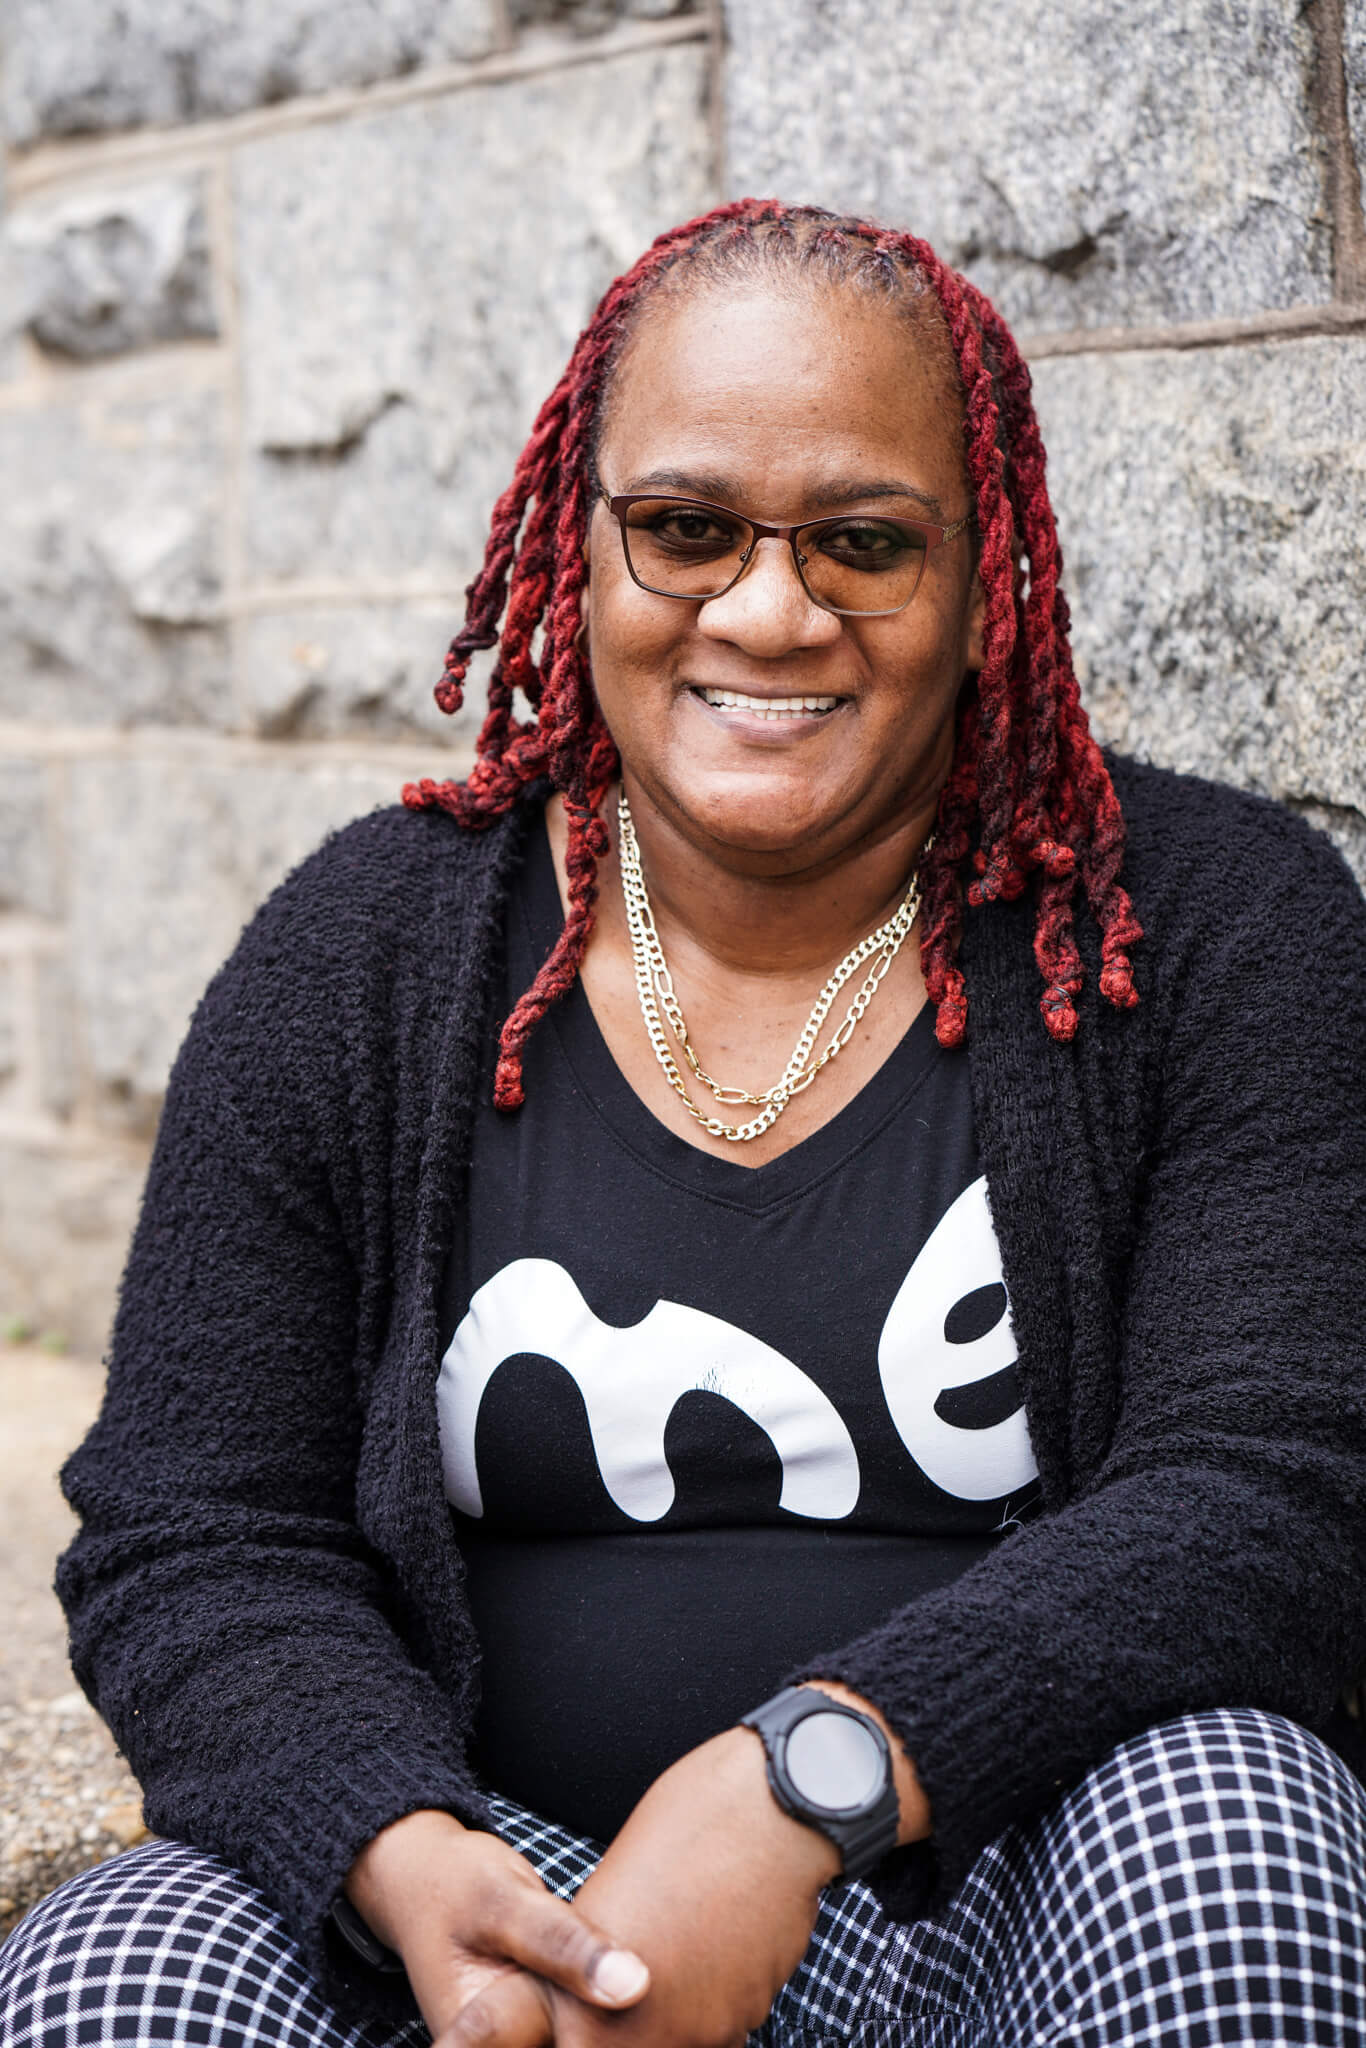 baltimore portrait photographer, Woman with red braids wearing shirt that says 